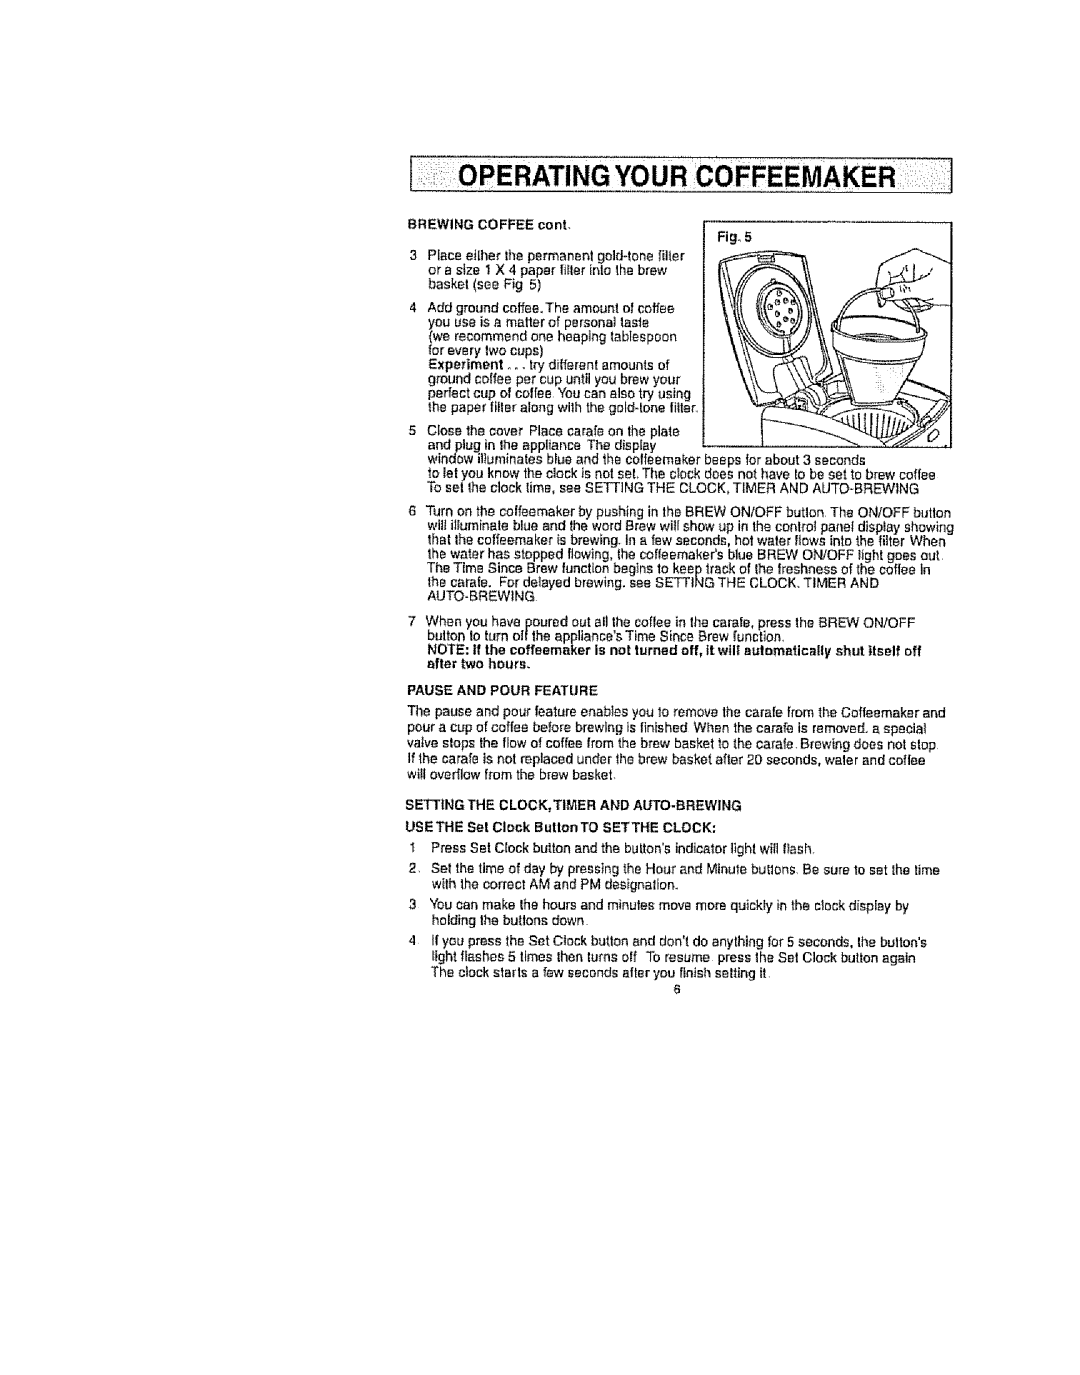 Kenmore 100.90007 Operatingyour Coffeemaker, Vff, baskettsee, Brewing, tablespoon, cups, Experiment, plug in the appliance 